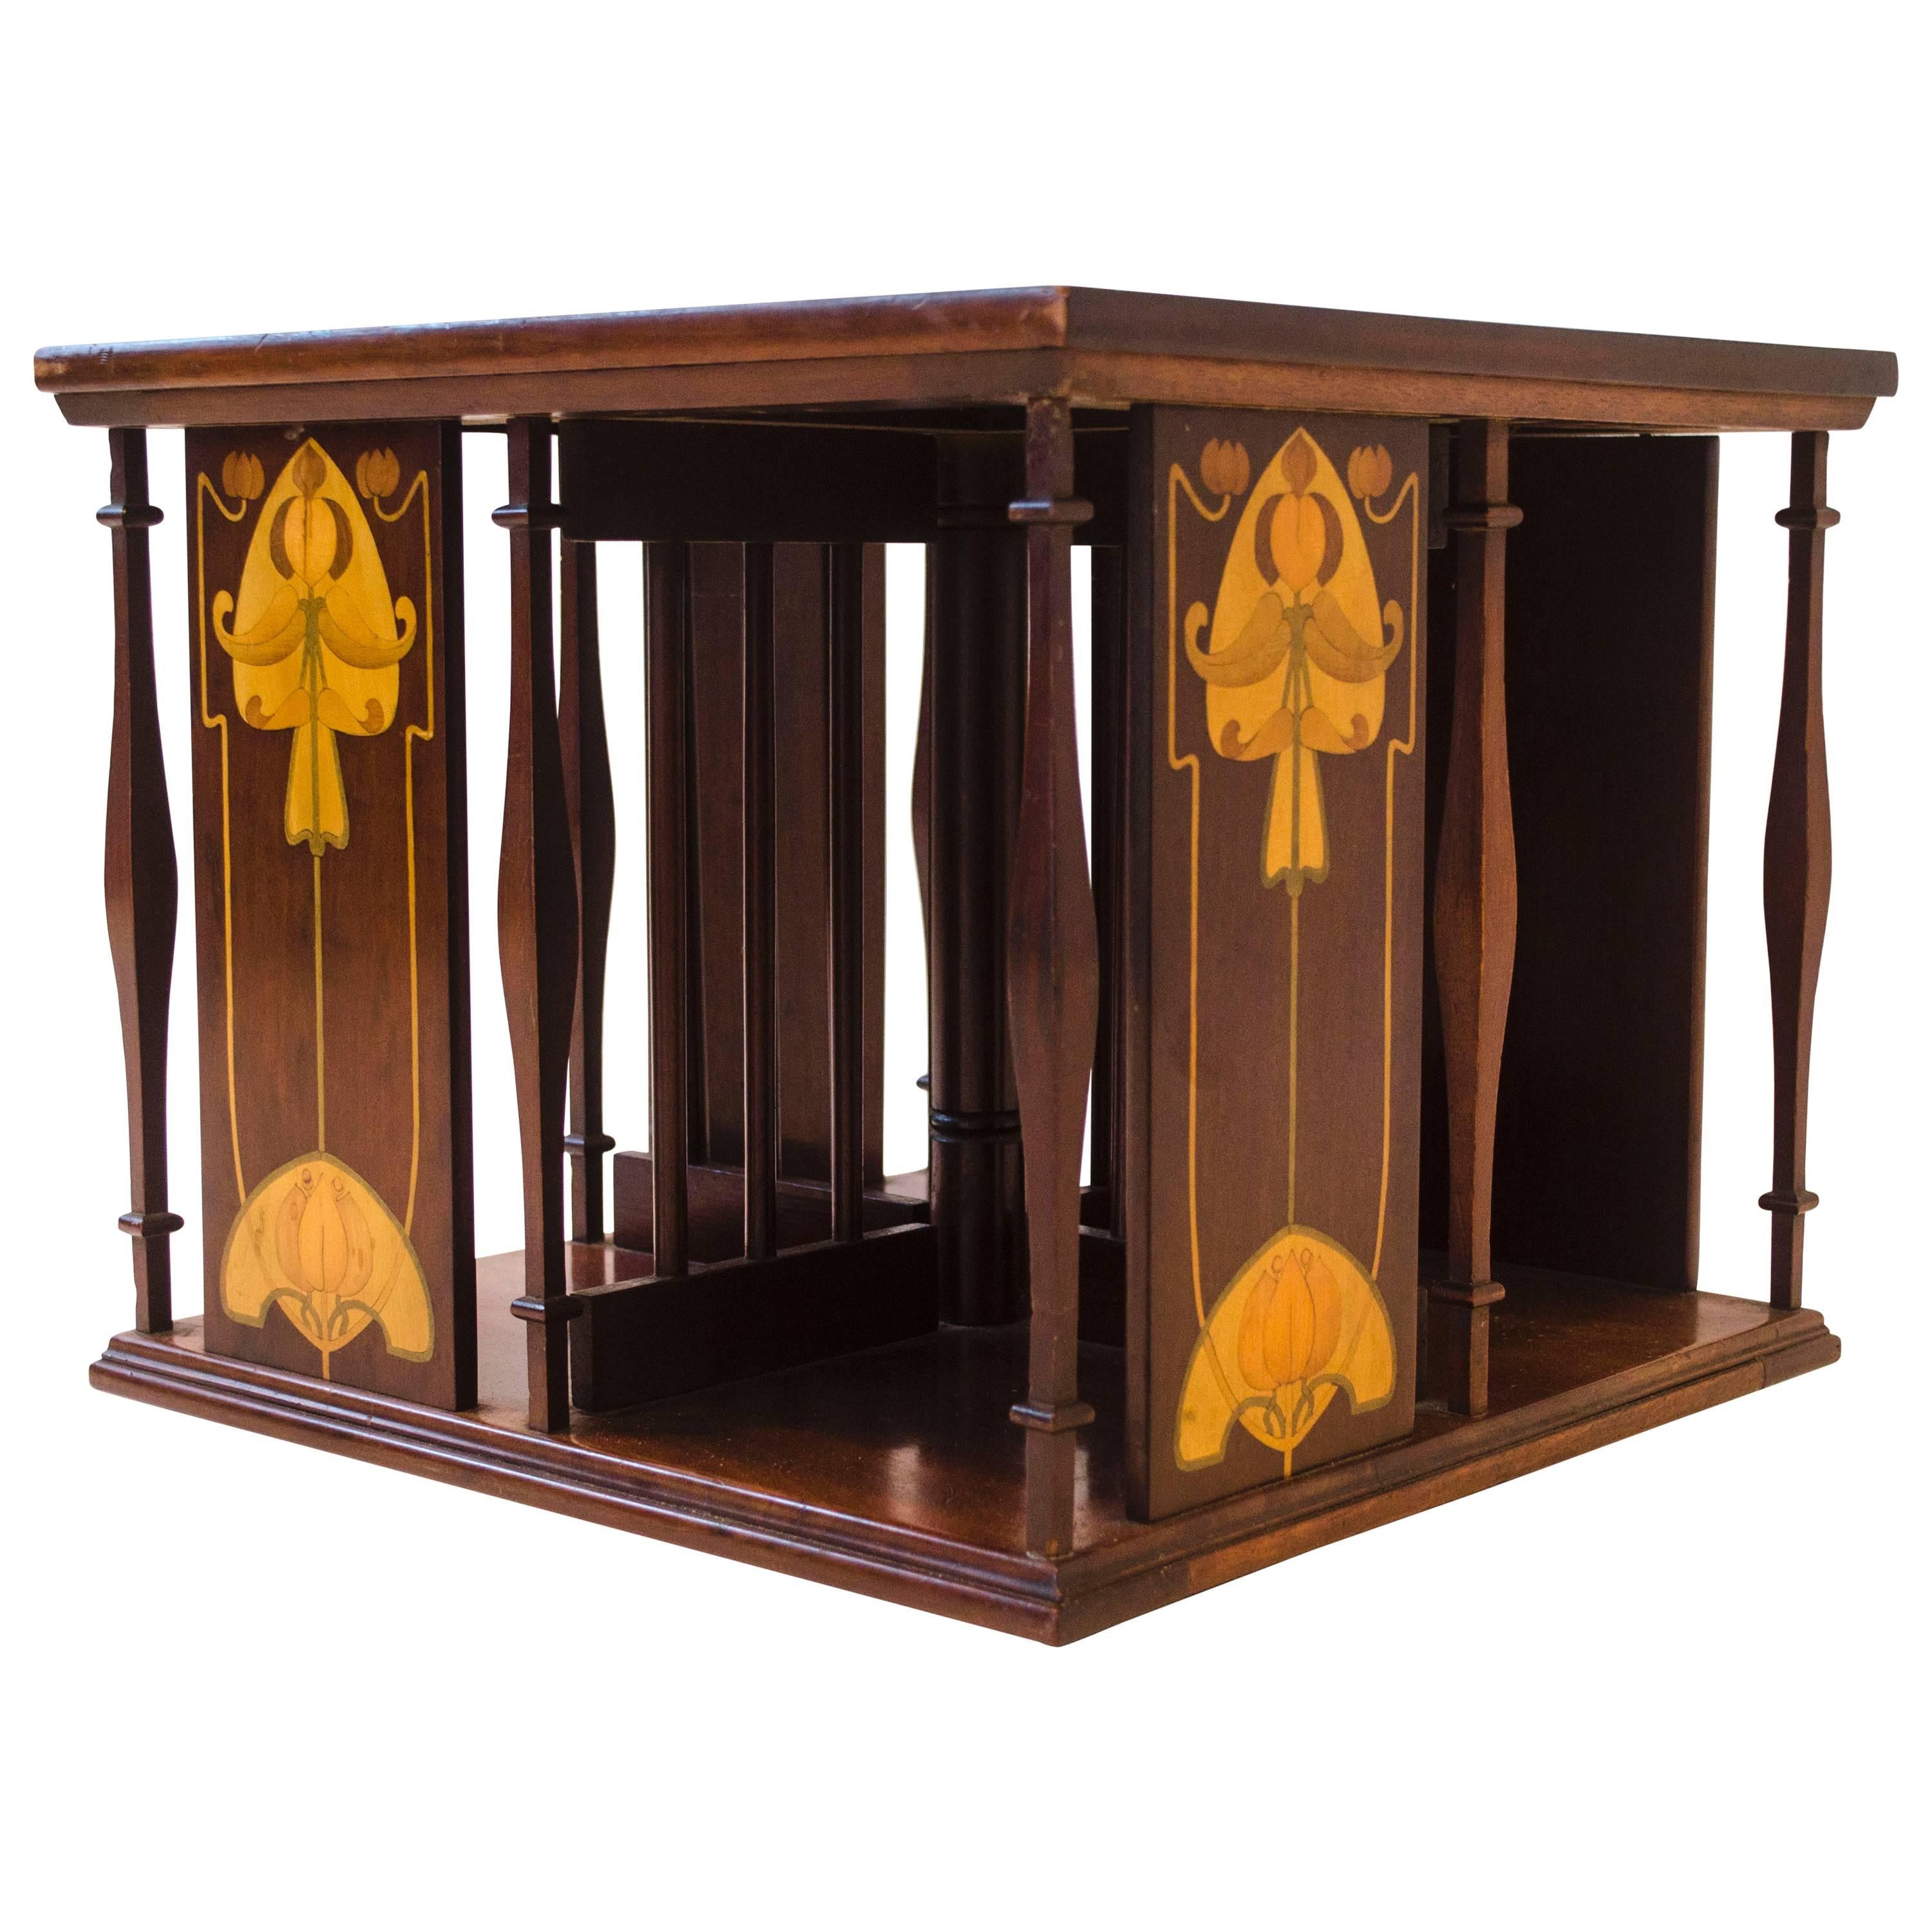 Shapland & Petter. An Arts & Crafts Table Top Revolving Inlaid Bookcase 